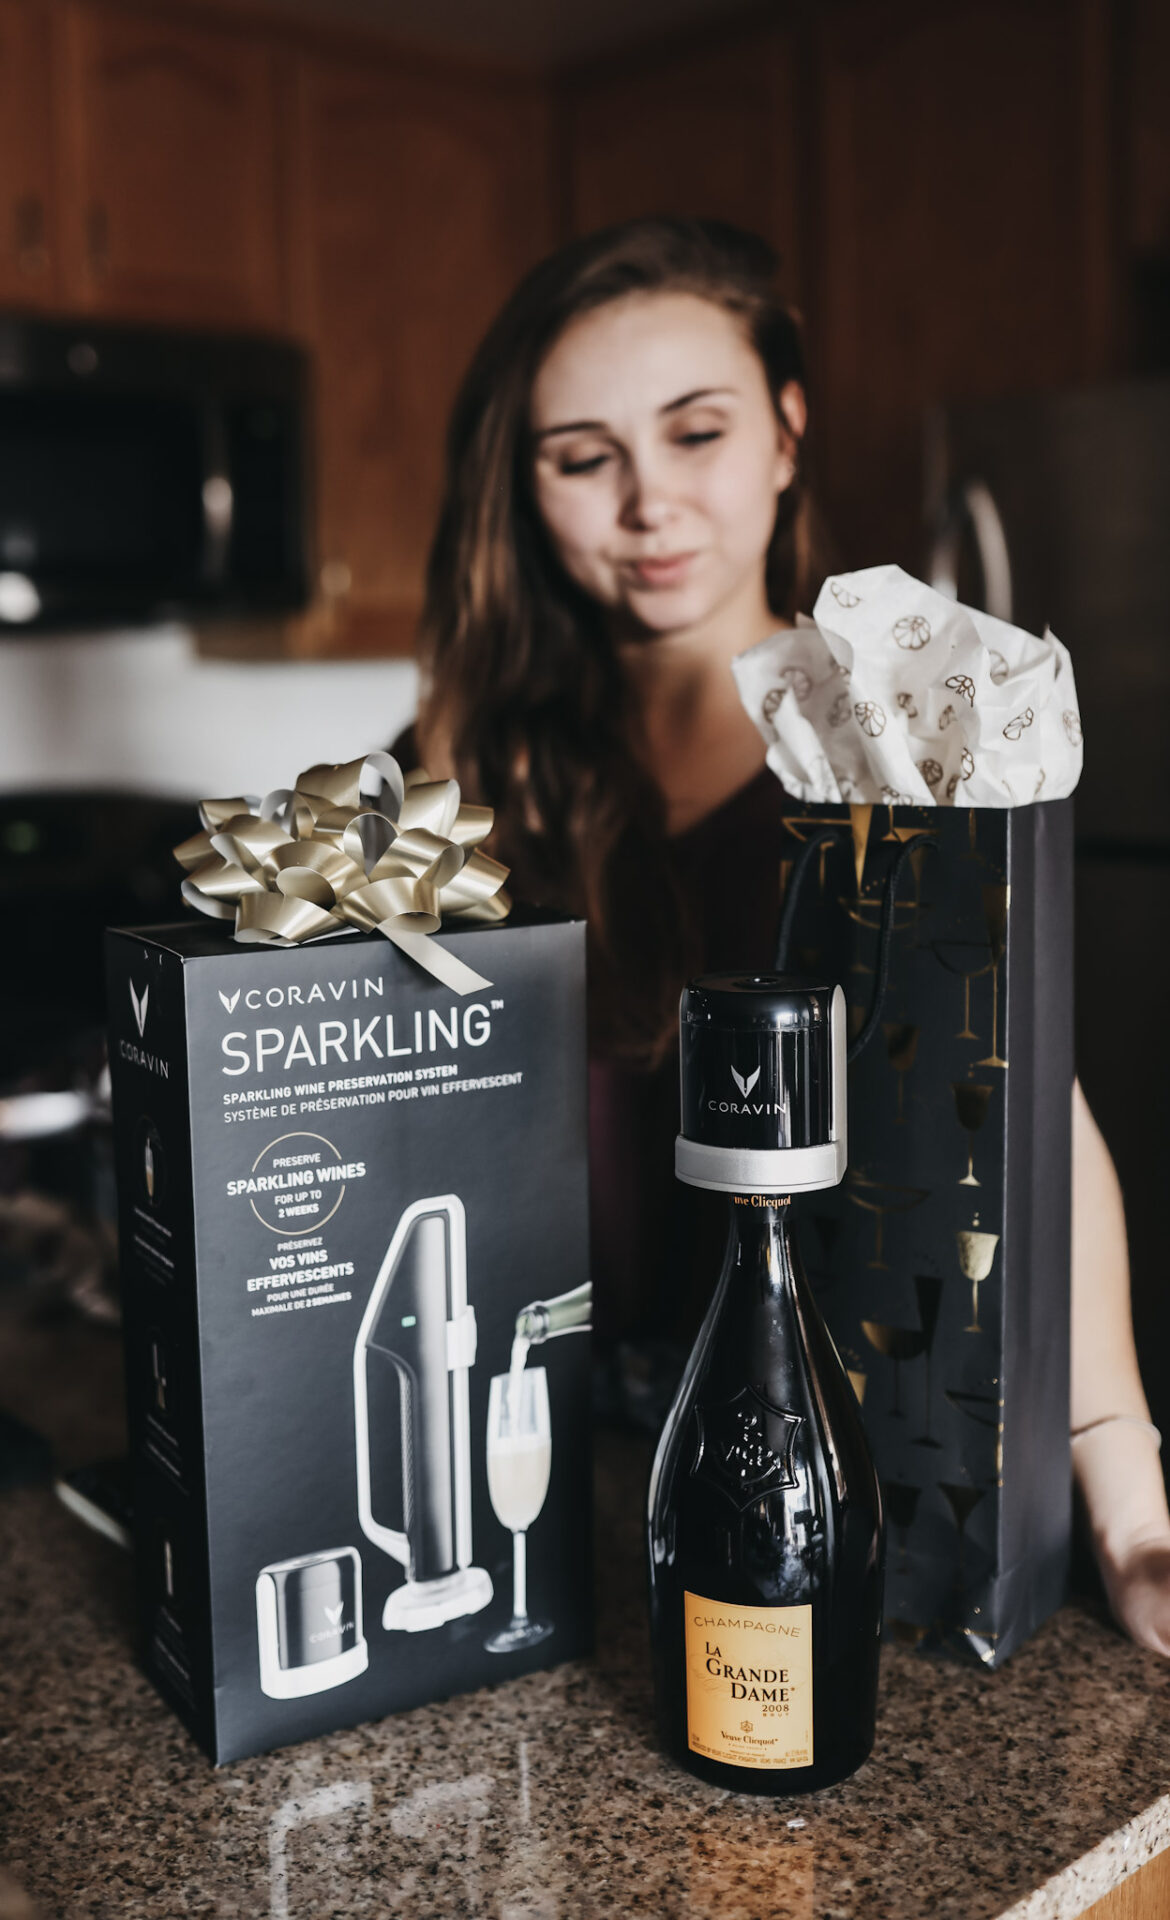 Paige with the Coravin sparkling to keep open champagne fresh